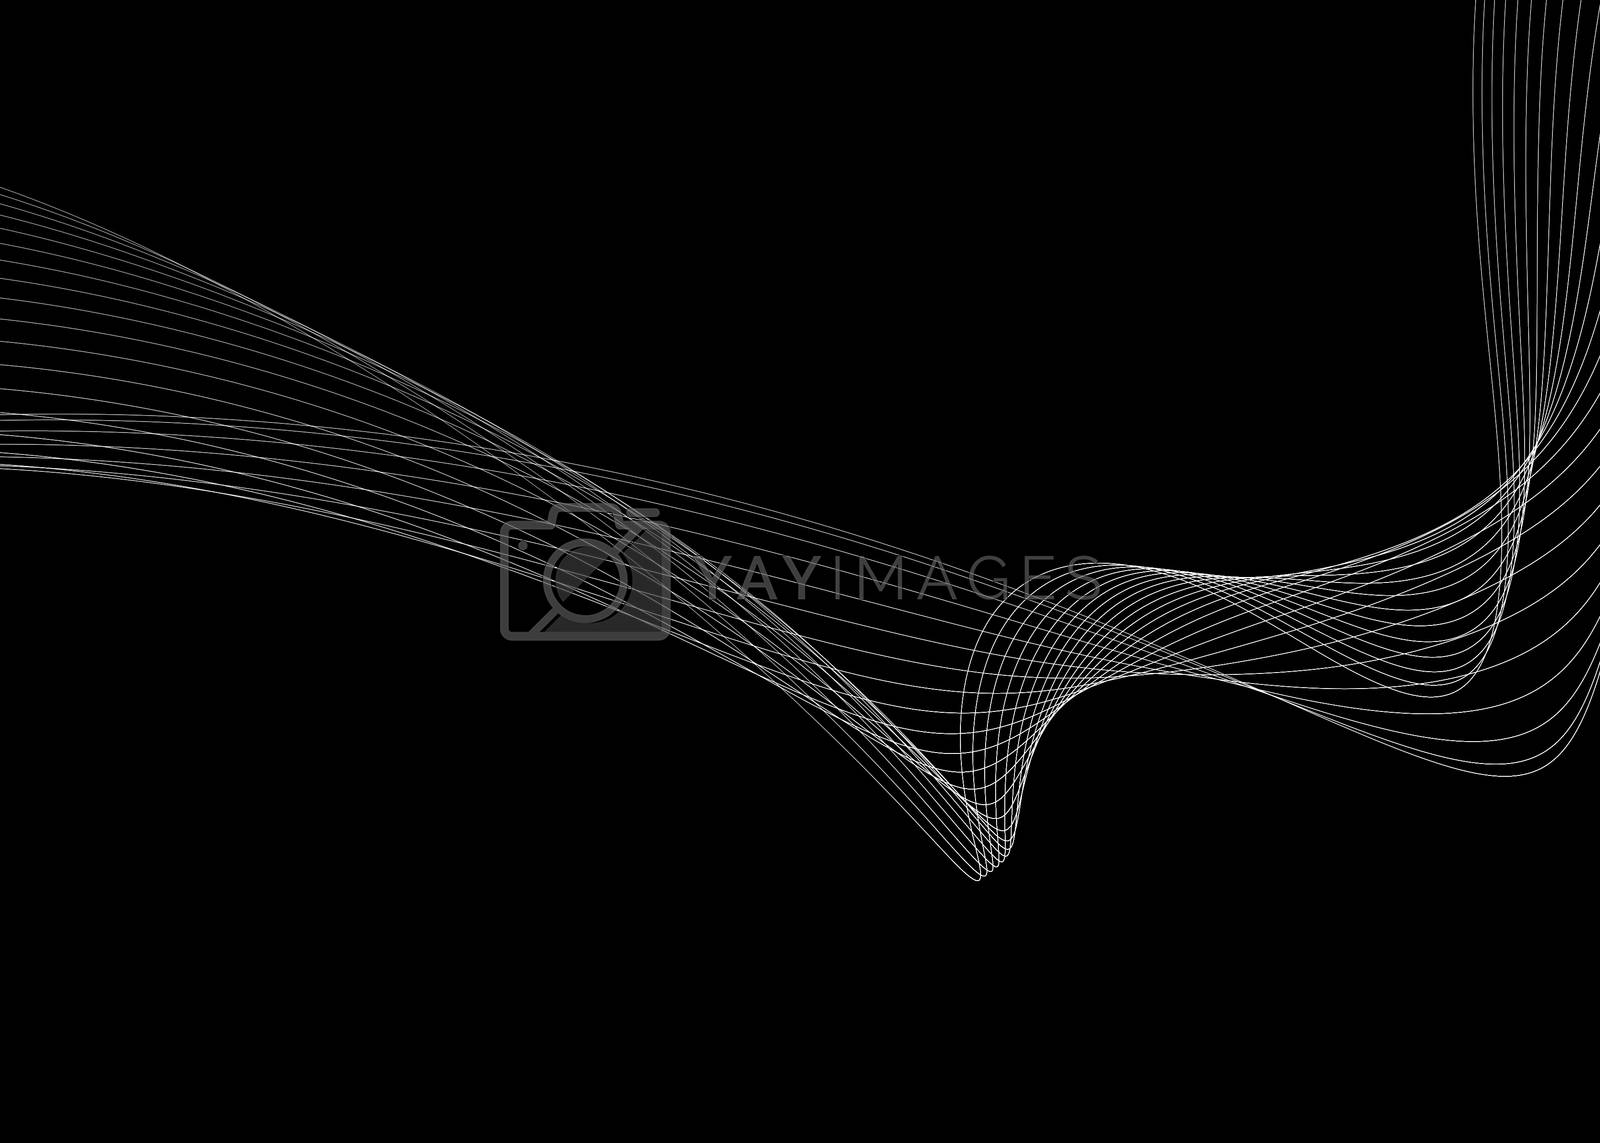 Royalty free image of abstract background with curve lines by teerawit